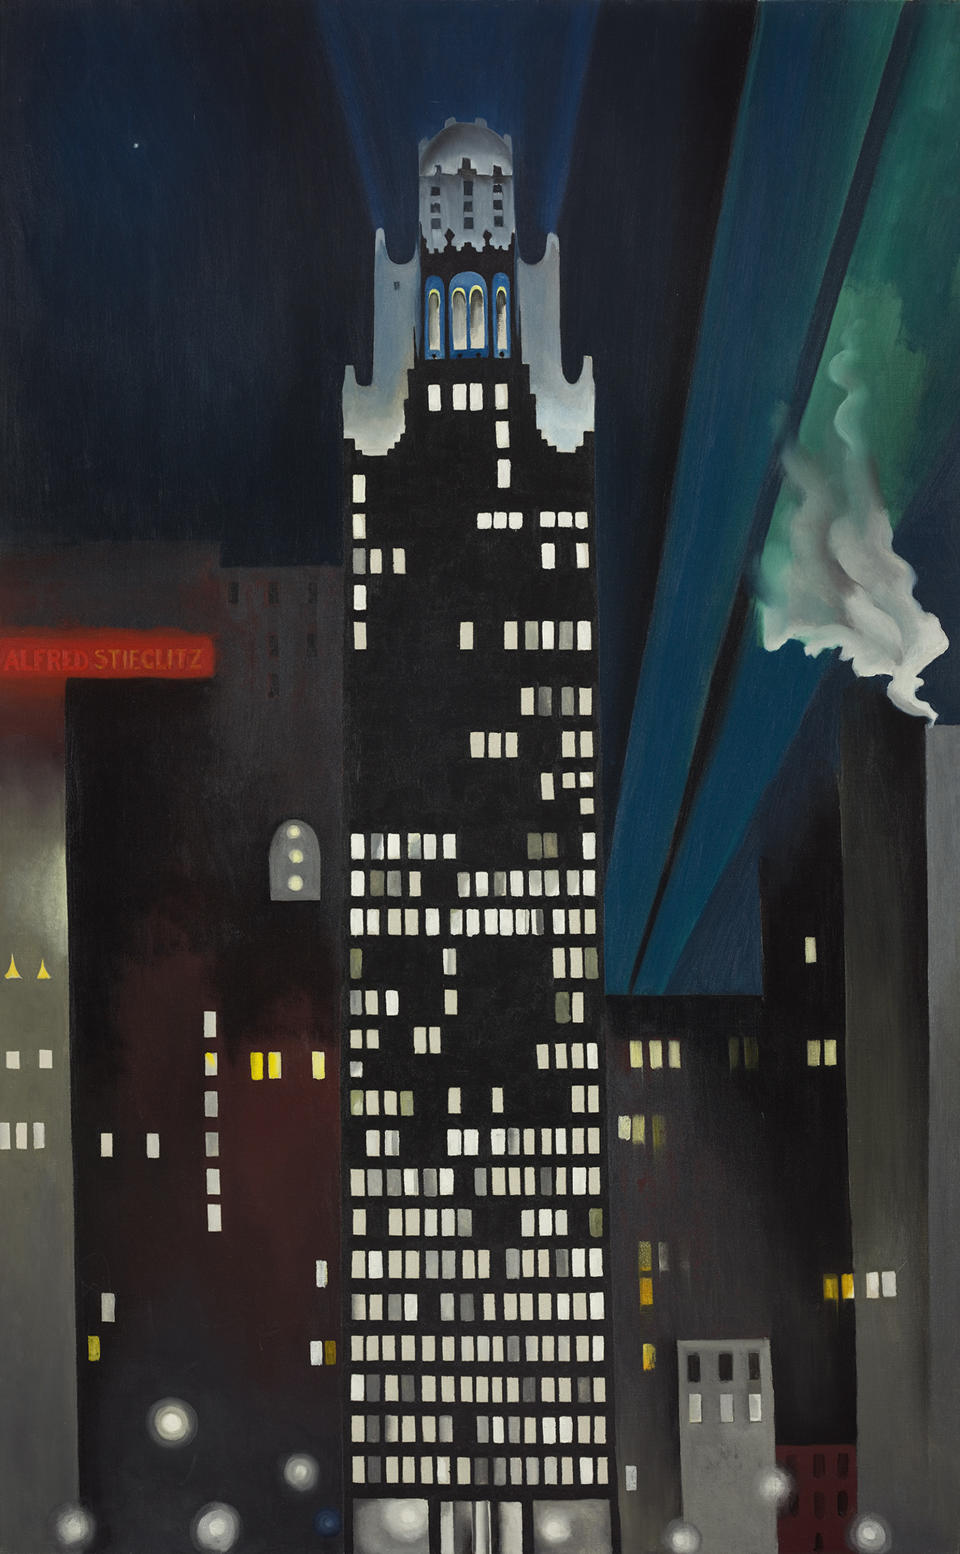 This photo copy of the 1927 Georgia O'Keeffe oil on canvas painting "Radiator Building-Night, New York" is provided by Crystal Bridges Museum of American Art, in Bentonville, Ark. The Fisk Collection, including pieces by O'Keeffe and her late photographer husband, Alfred Stieglitz, will make its debut at Crystal Bridges, Saturday, Nov. 9, 2013. (AP Photo/Crystal Bridges Museum of American Art Fisk Collection, Georgia O'Keeffe)